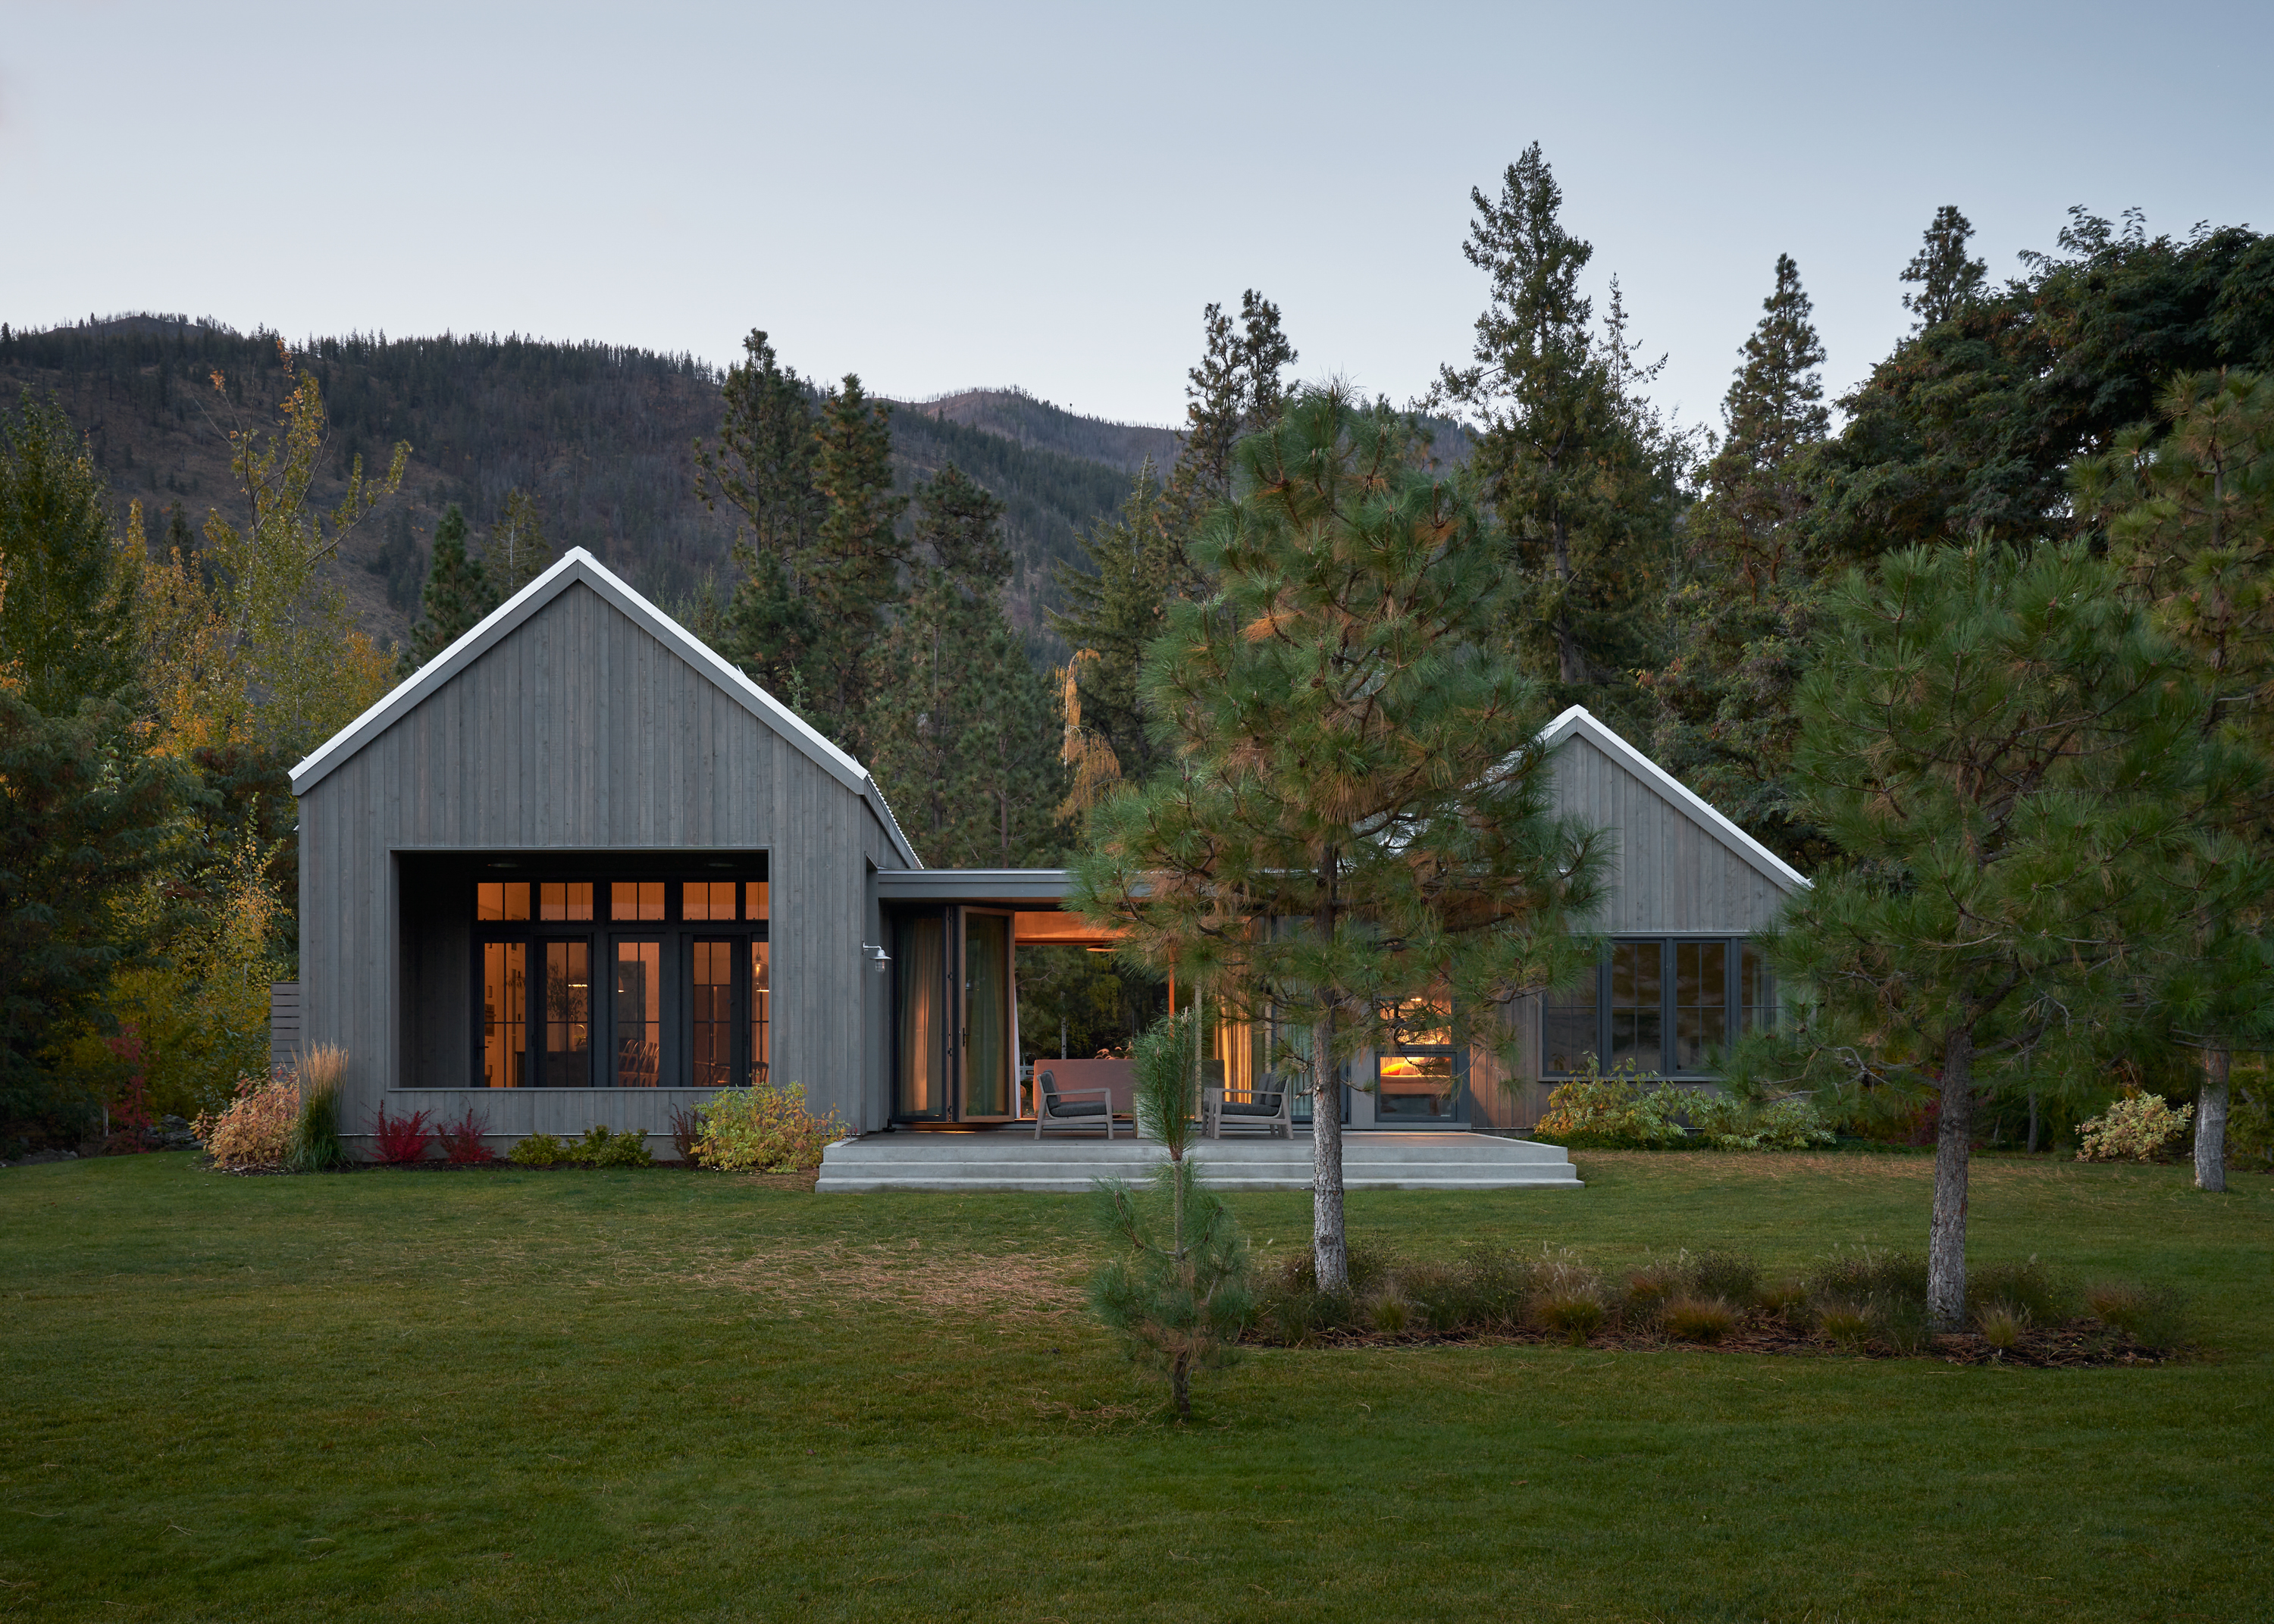 Looking through the modern rustic lake Chelan house. Pacific Northwest Architecture.